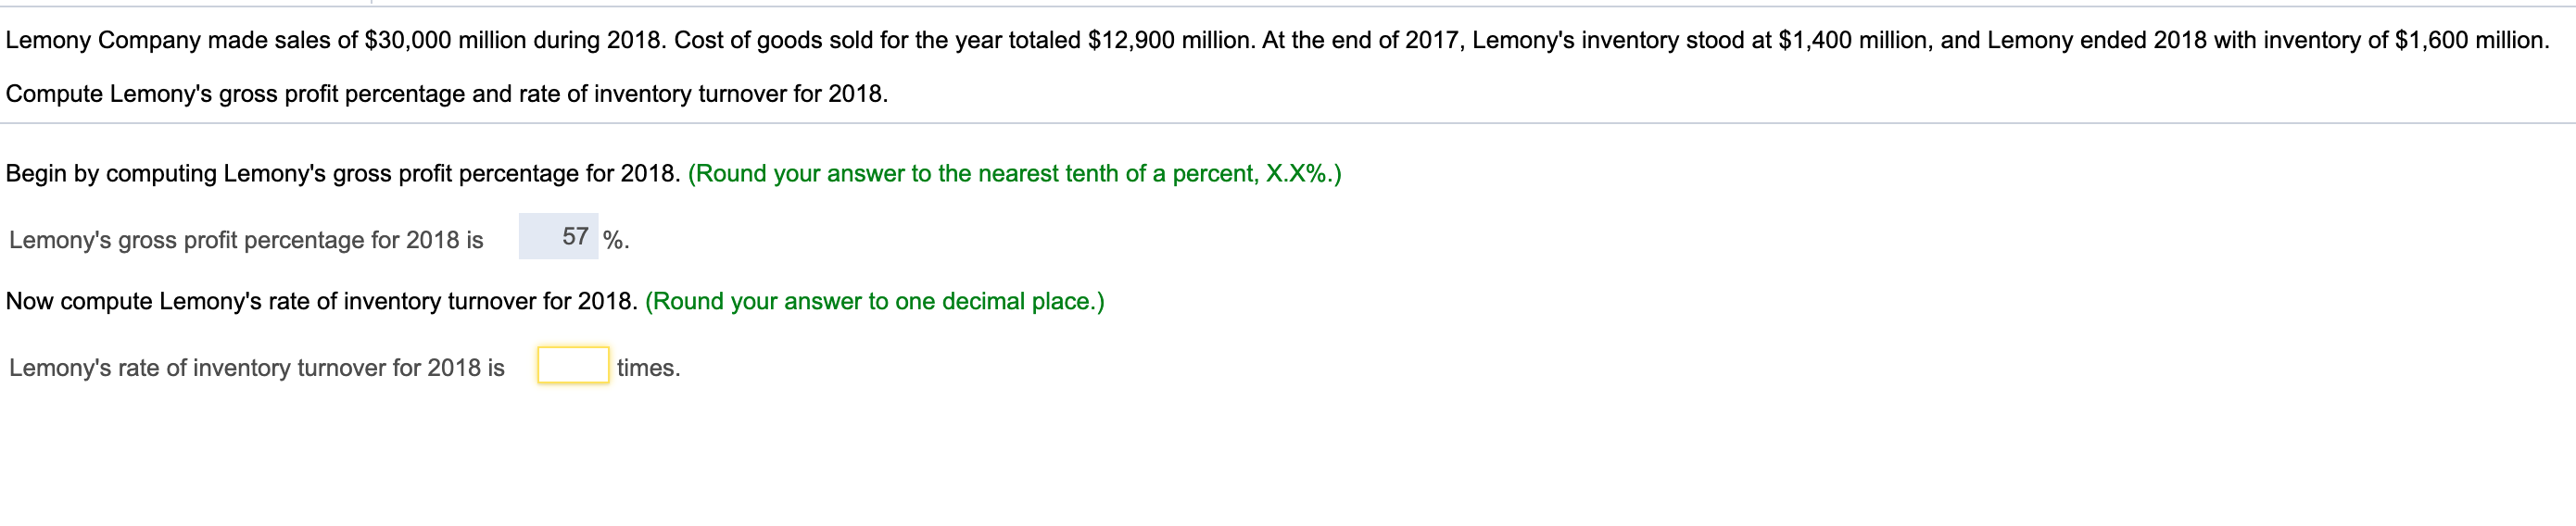 Lemony Company made sales of $30,000 million during 2018. Cost of goods sold for the year totaled $12,900 million. At the end